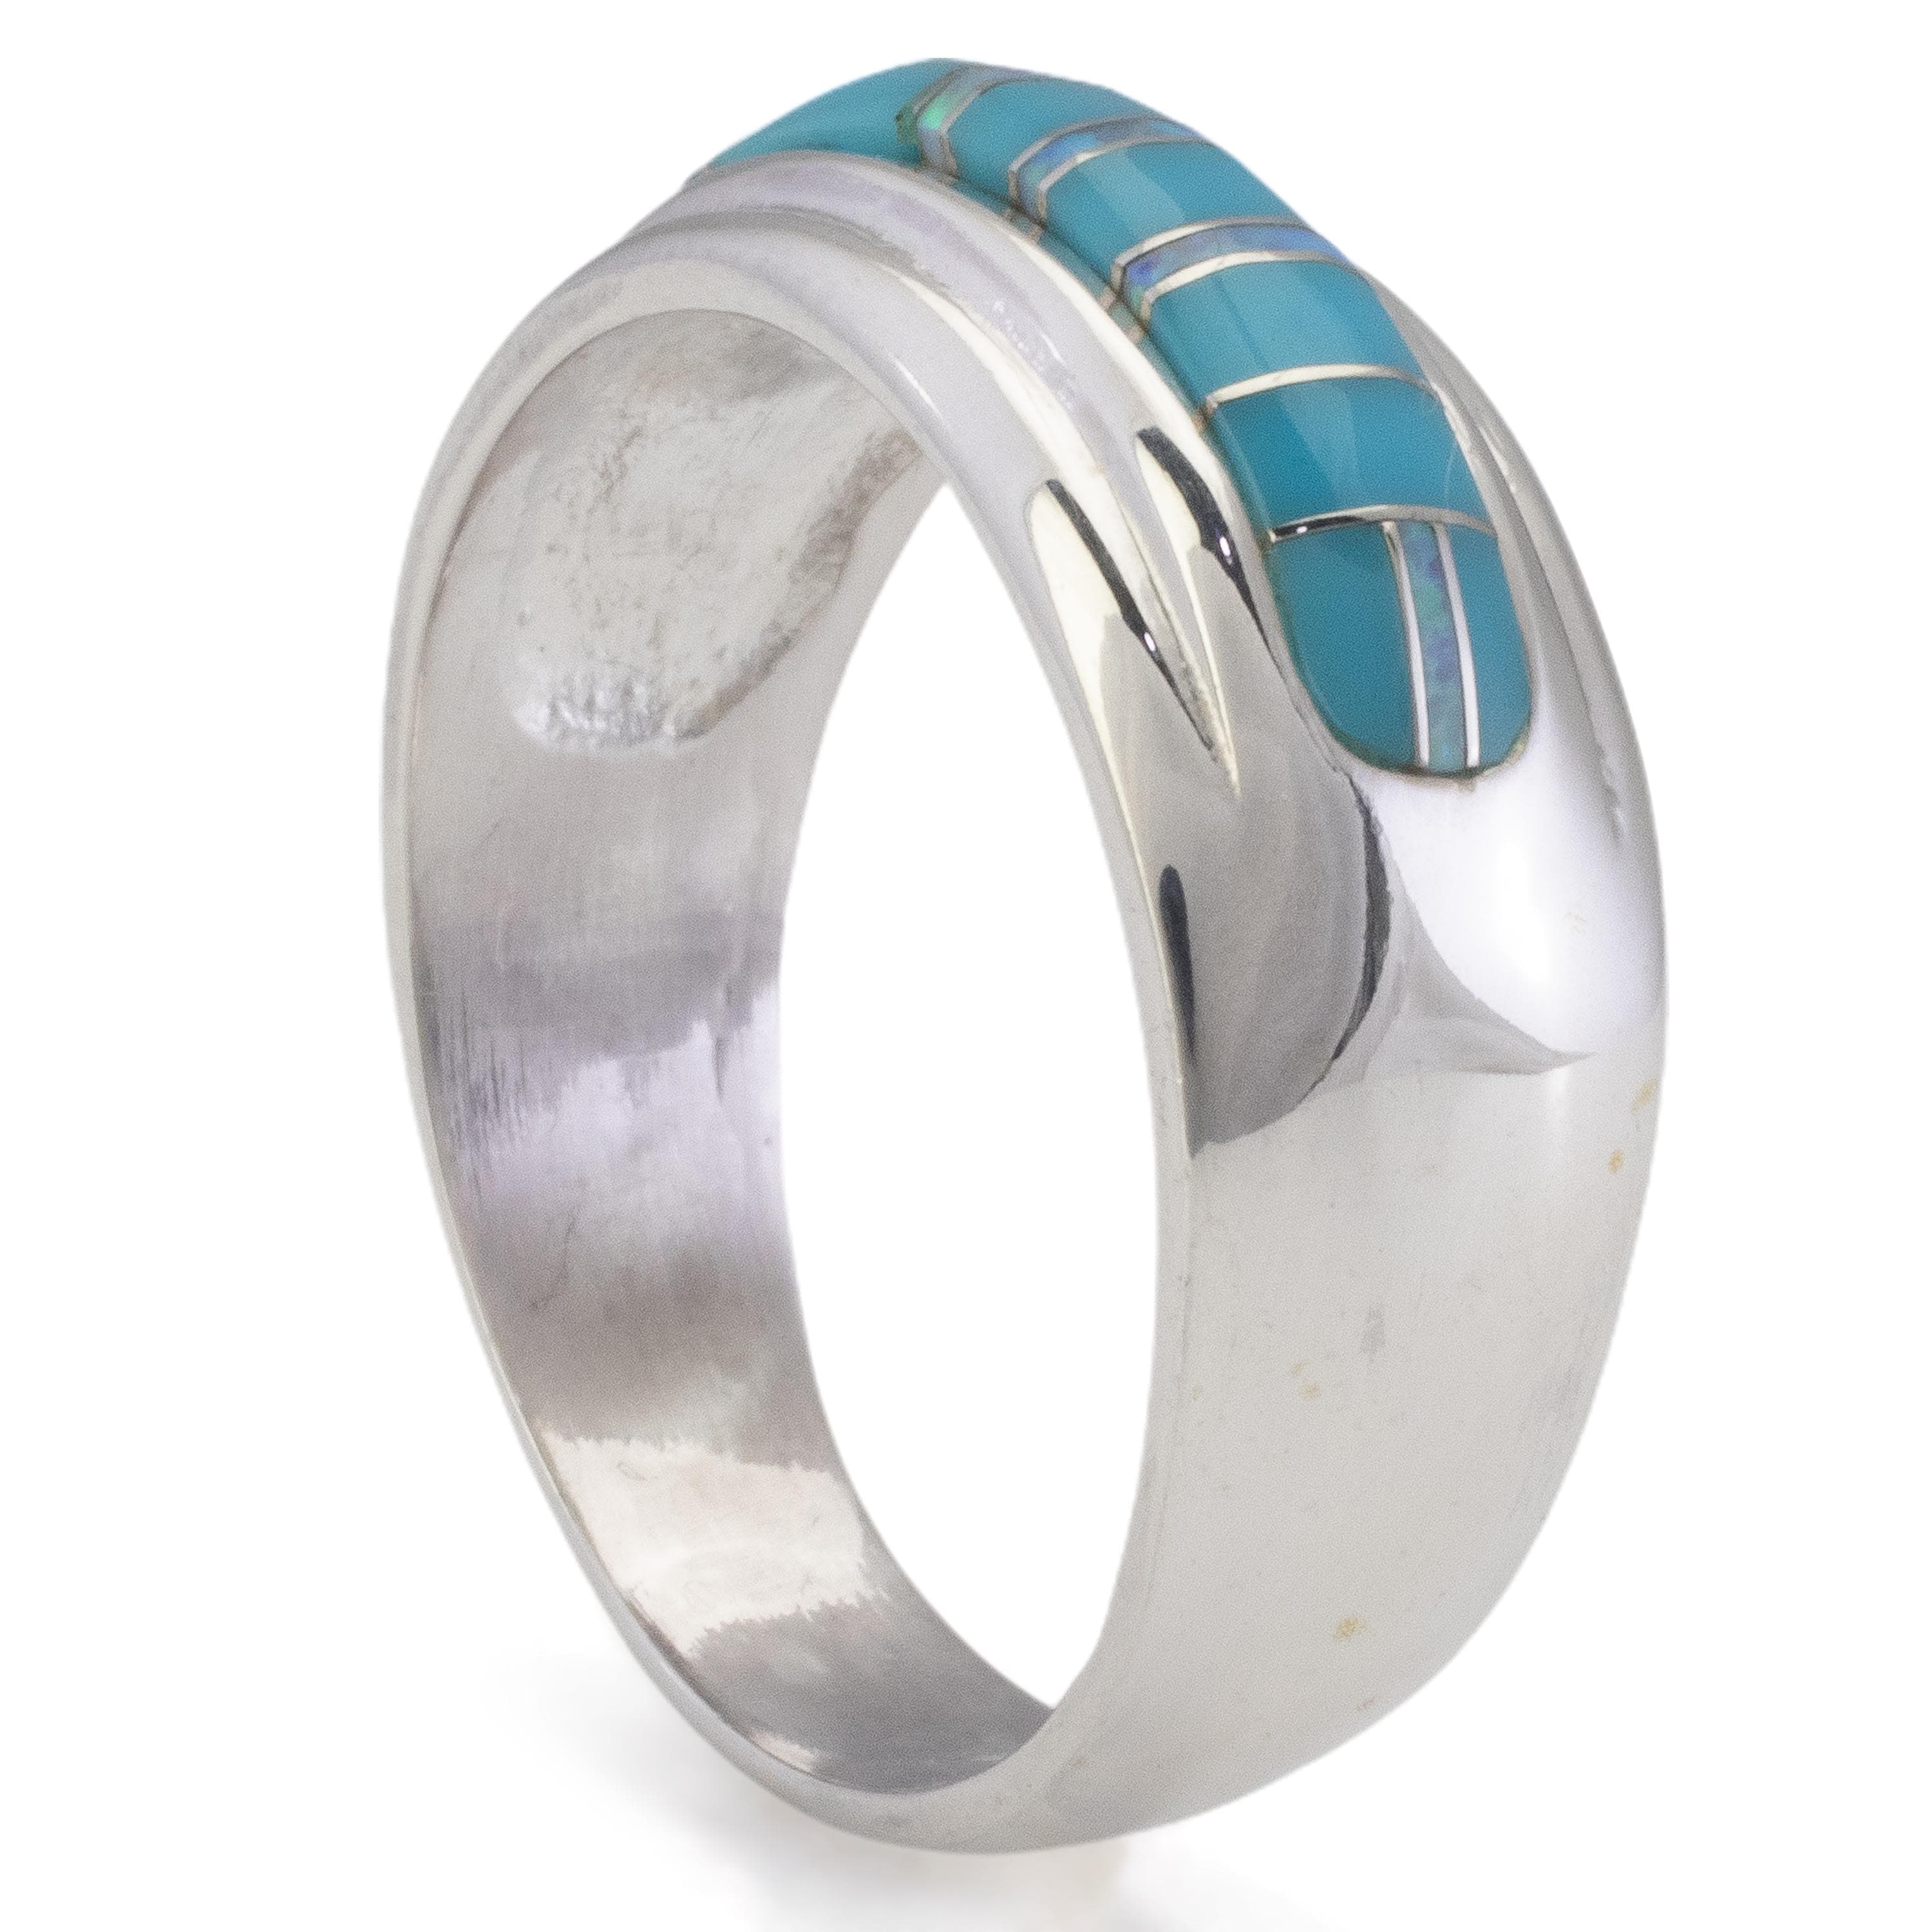 Kalifano Southwest Silver Jewelry Turquoise 925 Sterling Silver Ring Handmade with Laboratory Opal Accent